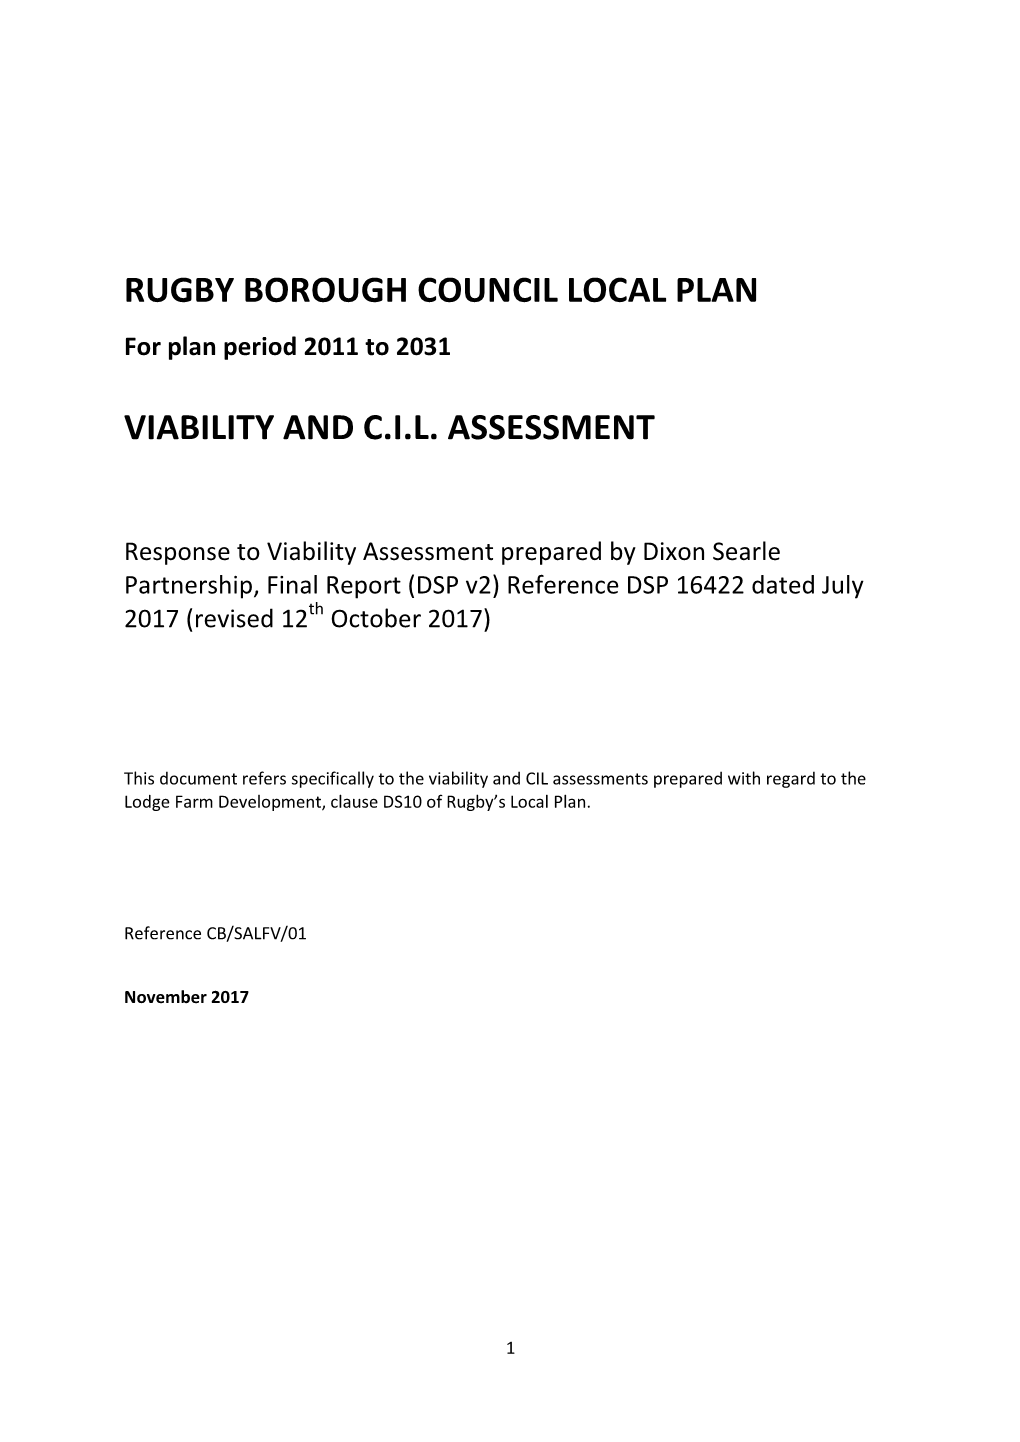 Rugby Borough Council Local Plan Viability and C.I.L